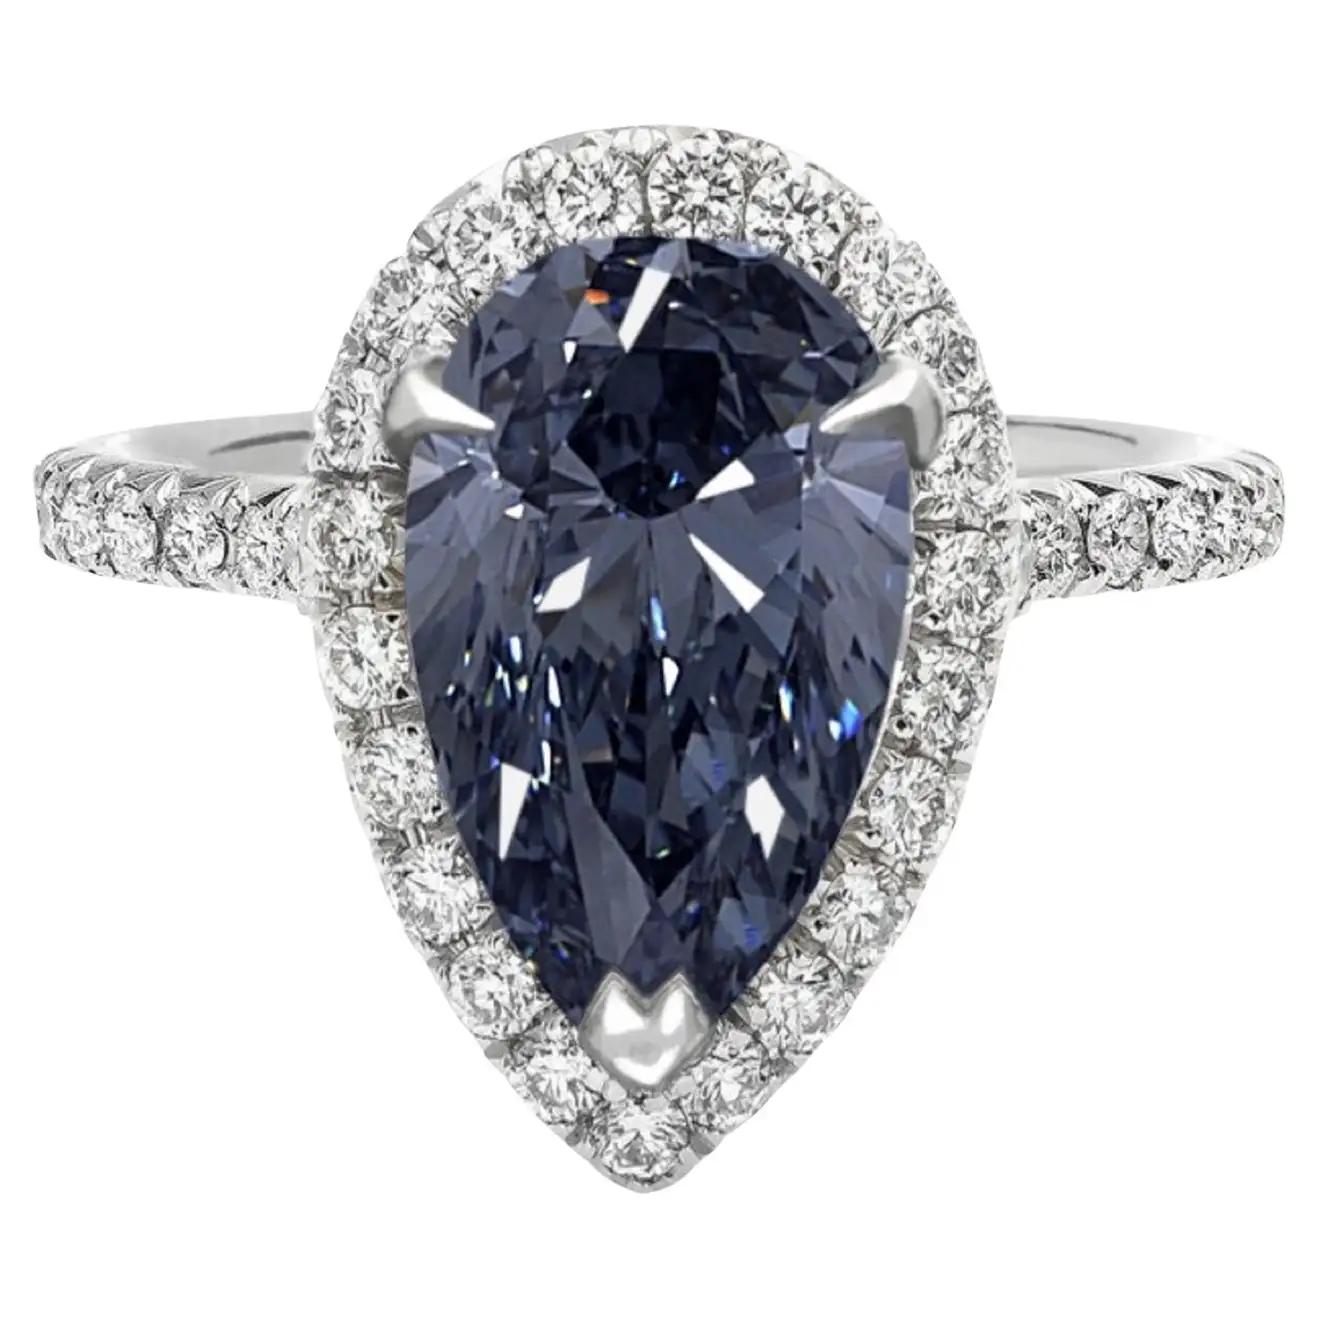 Exceptional GIA Certified 1 Carat Fancy Intense Blue Diamond Ring In New Condition For Sale In Rome, IT